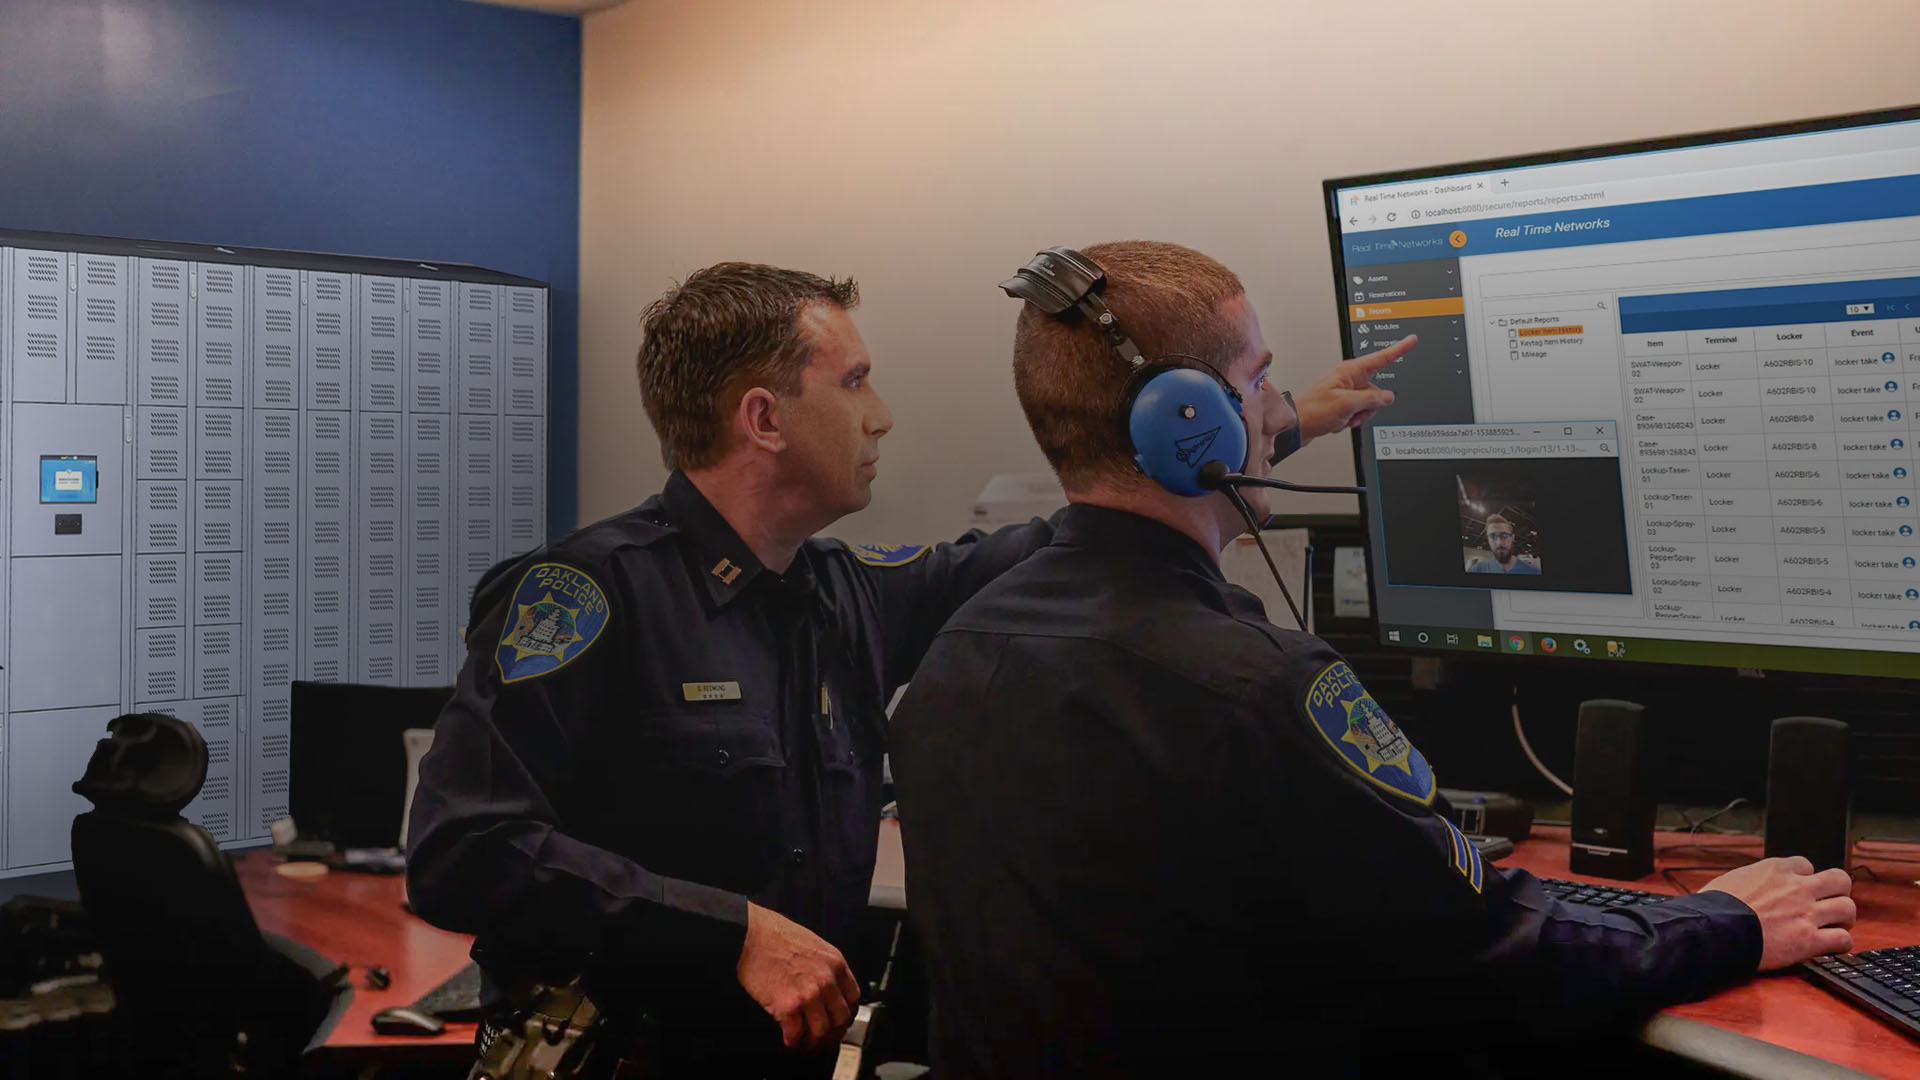 Police Officers Using AssetTracer Software to Track Police Gear, Weapons and Assets.